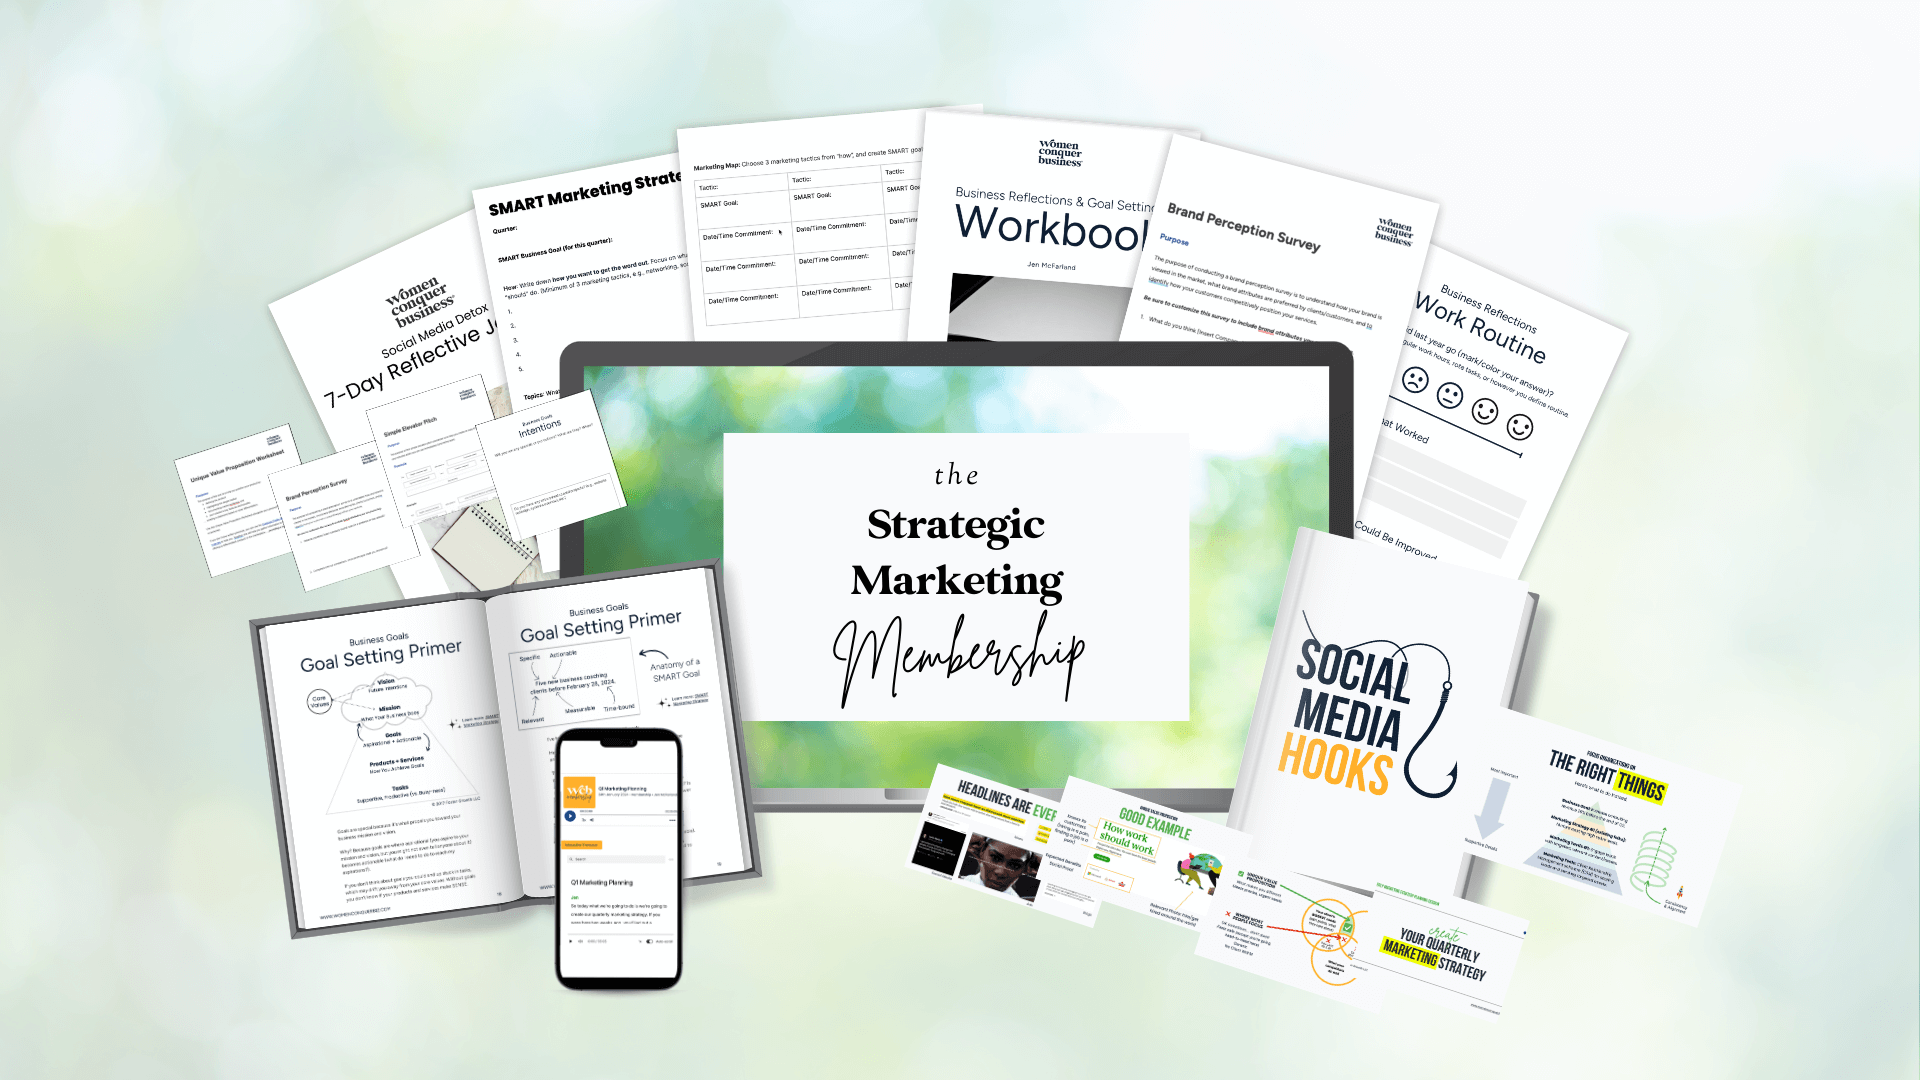 A snapshot of what's inside the Strategic Marketing Membership.